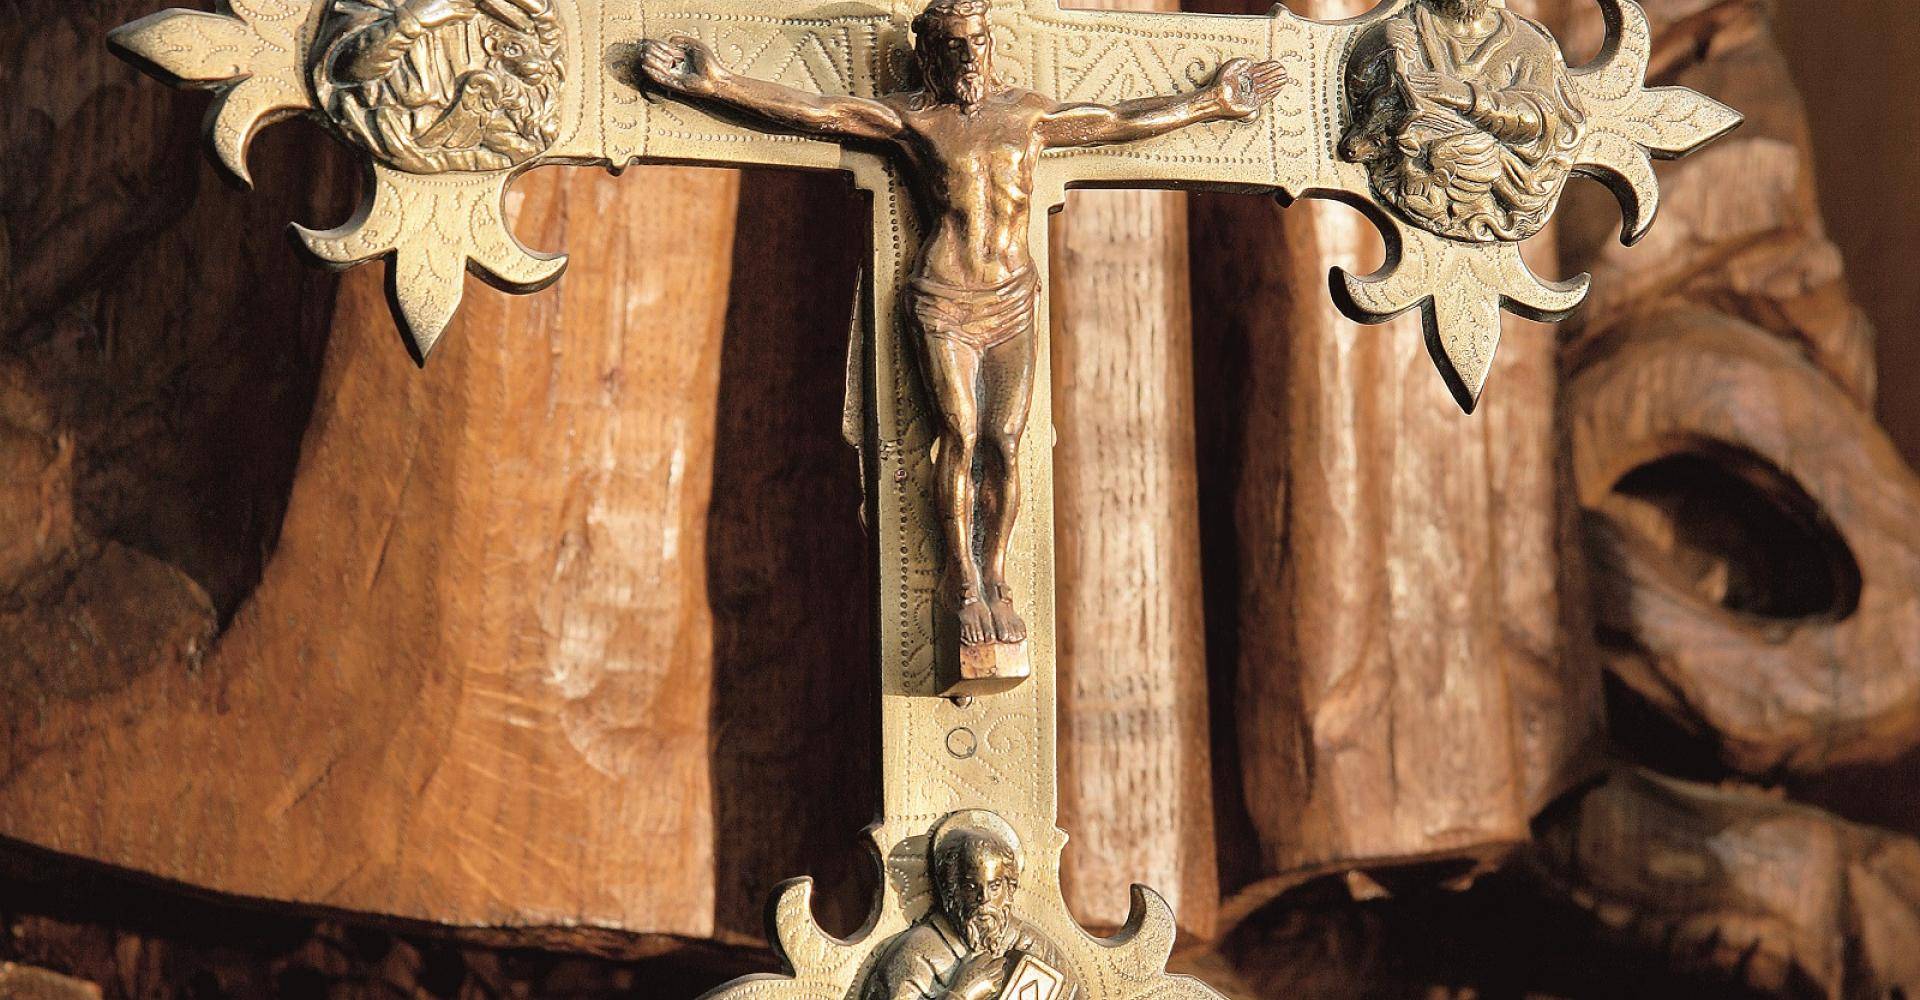 Detail of Crucifix in St Michael Chapel